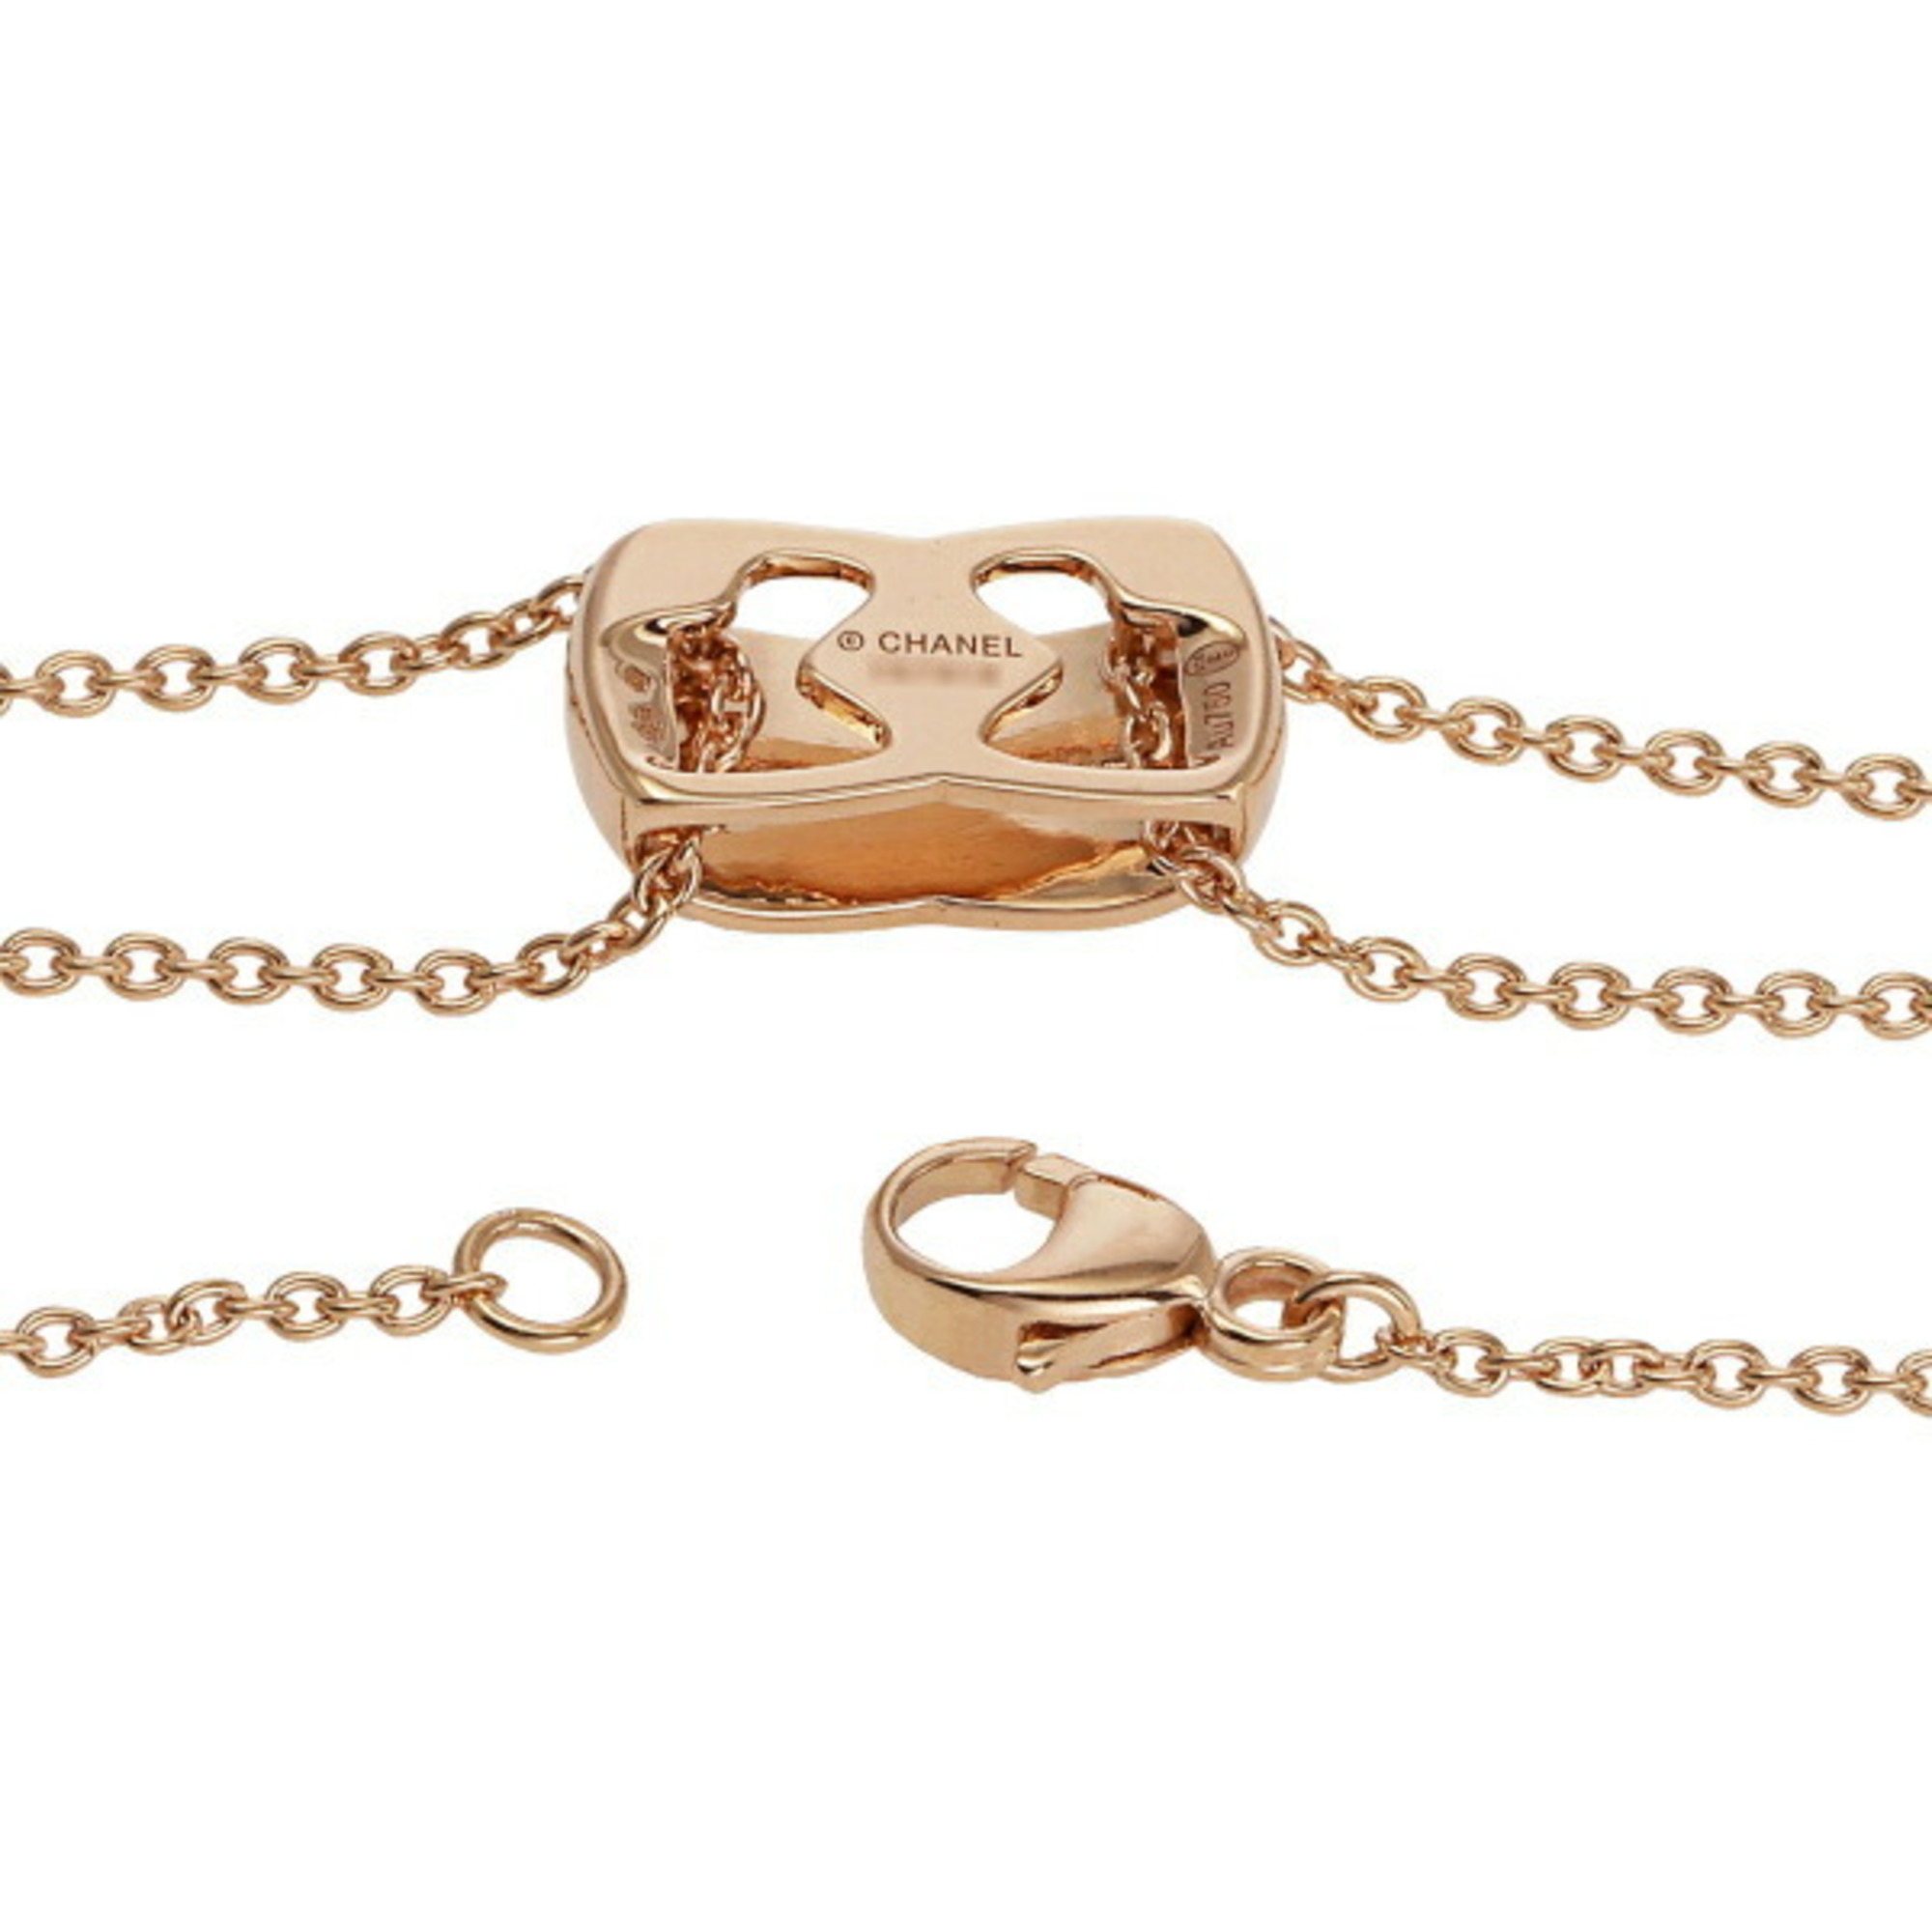 Chanel Coco Crush K18PG pink gold necklace